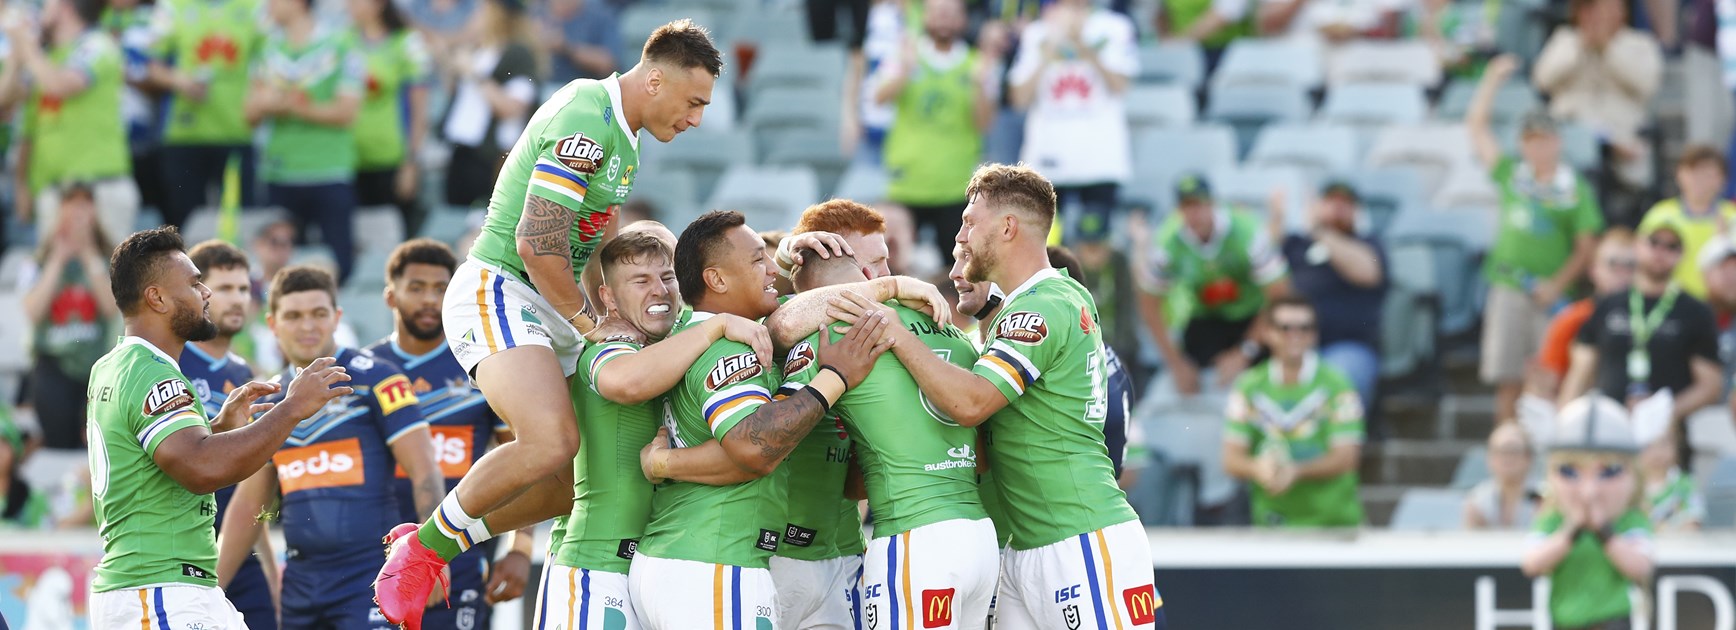 May 28: ARL Commission proposes date for NRL to restart